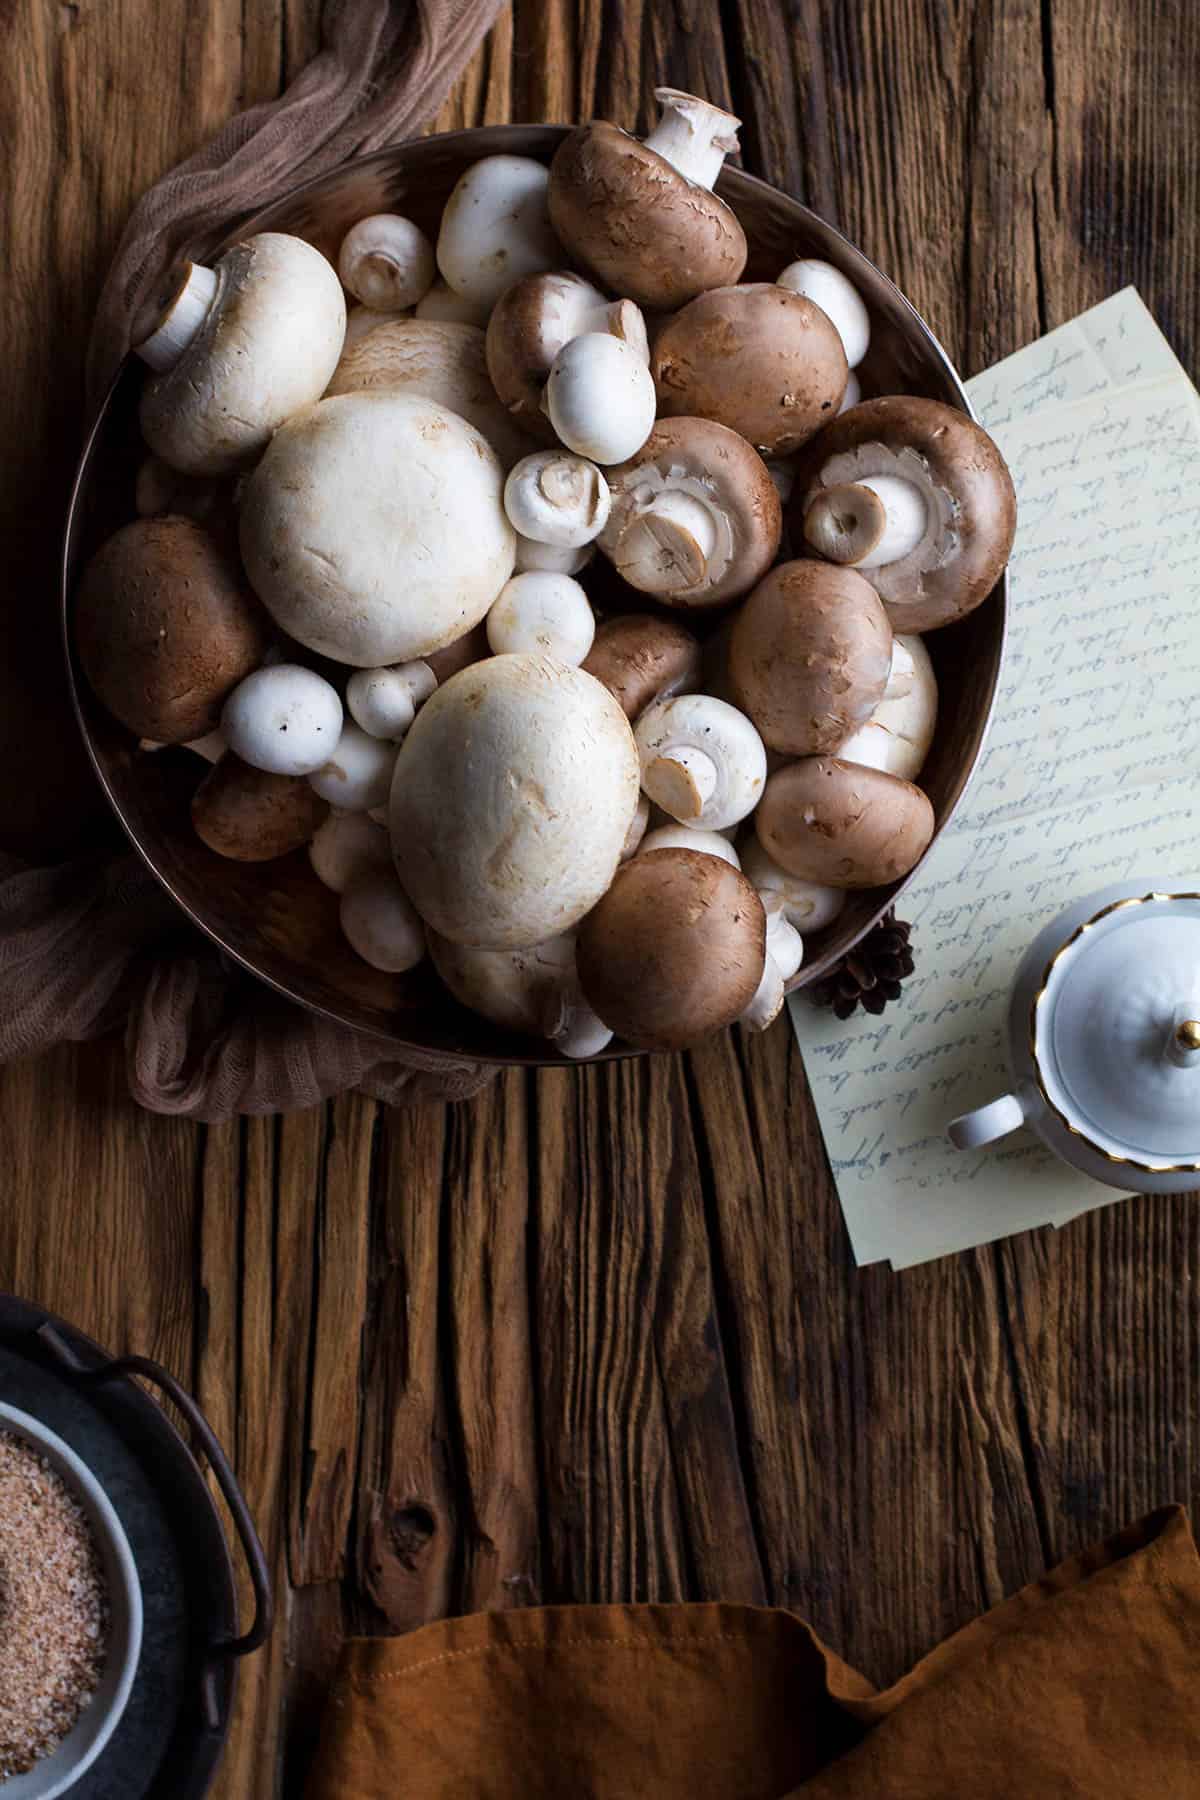 A big bowl with different kinds of mushrooms.